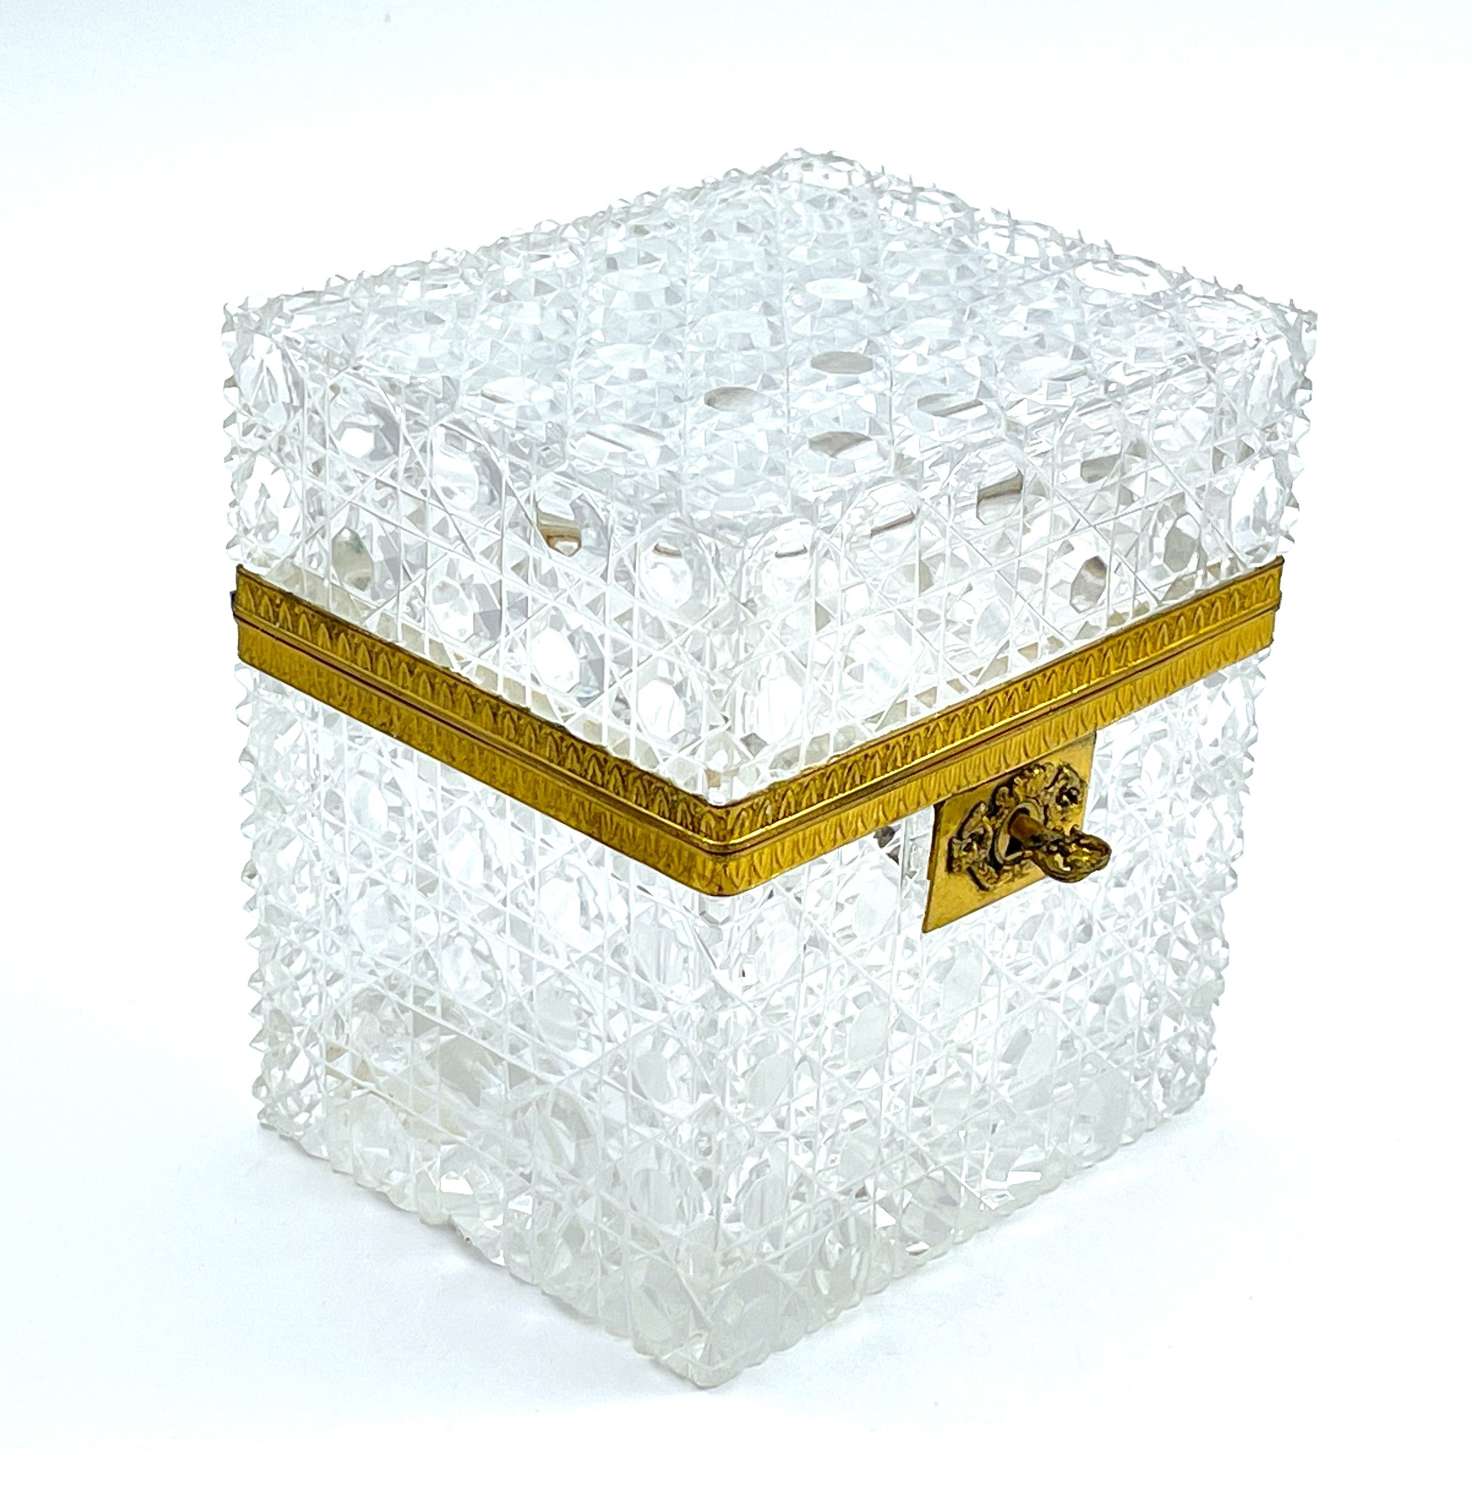 Large Antique Baccarat Cut Crystal Jewellery Casket Box with Key